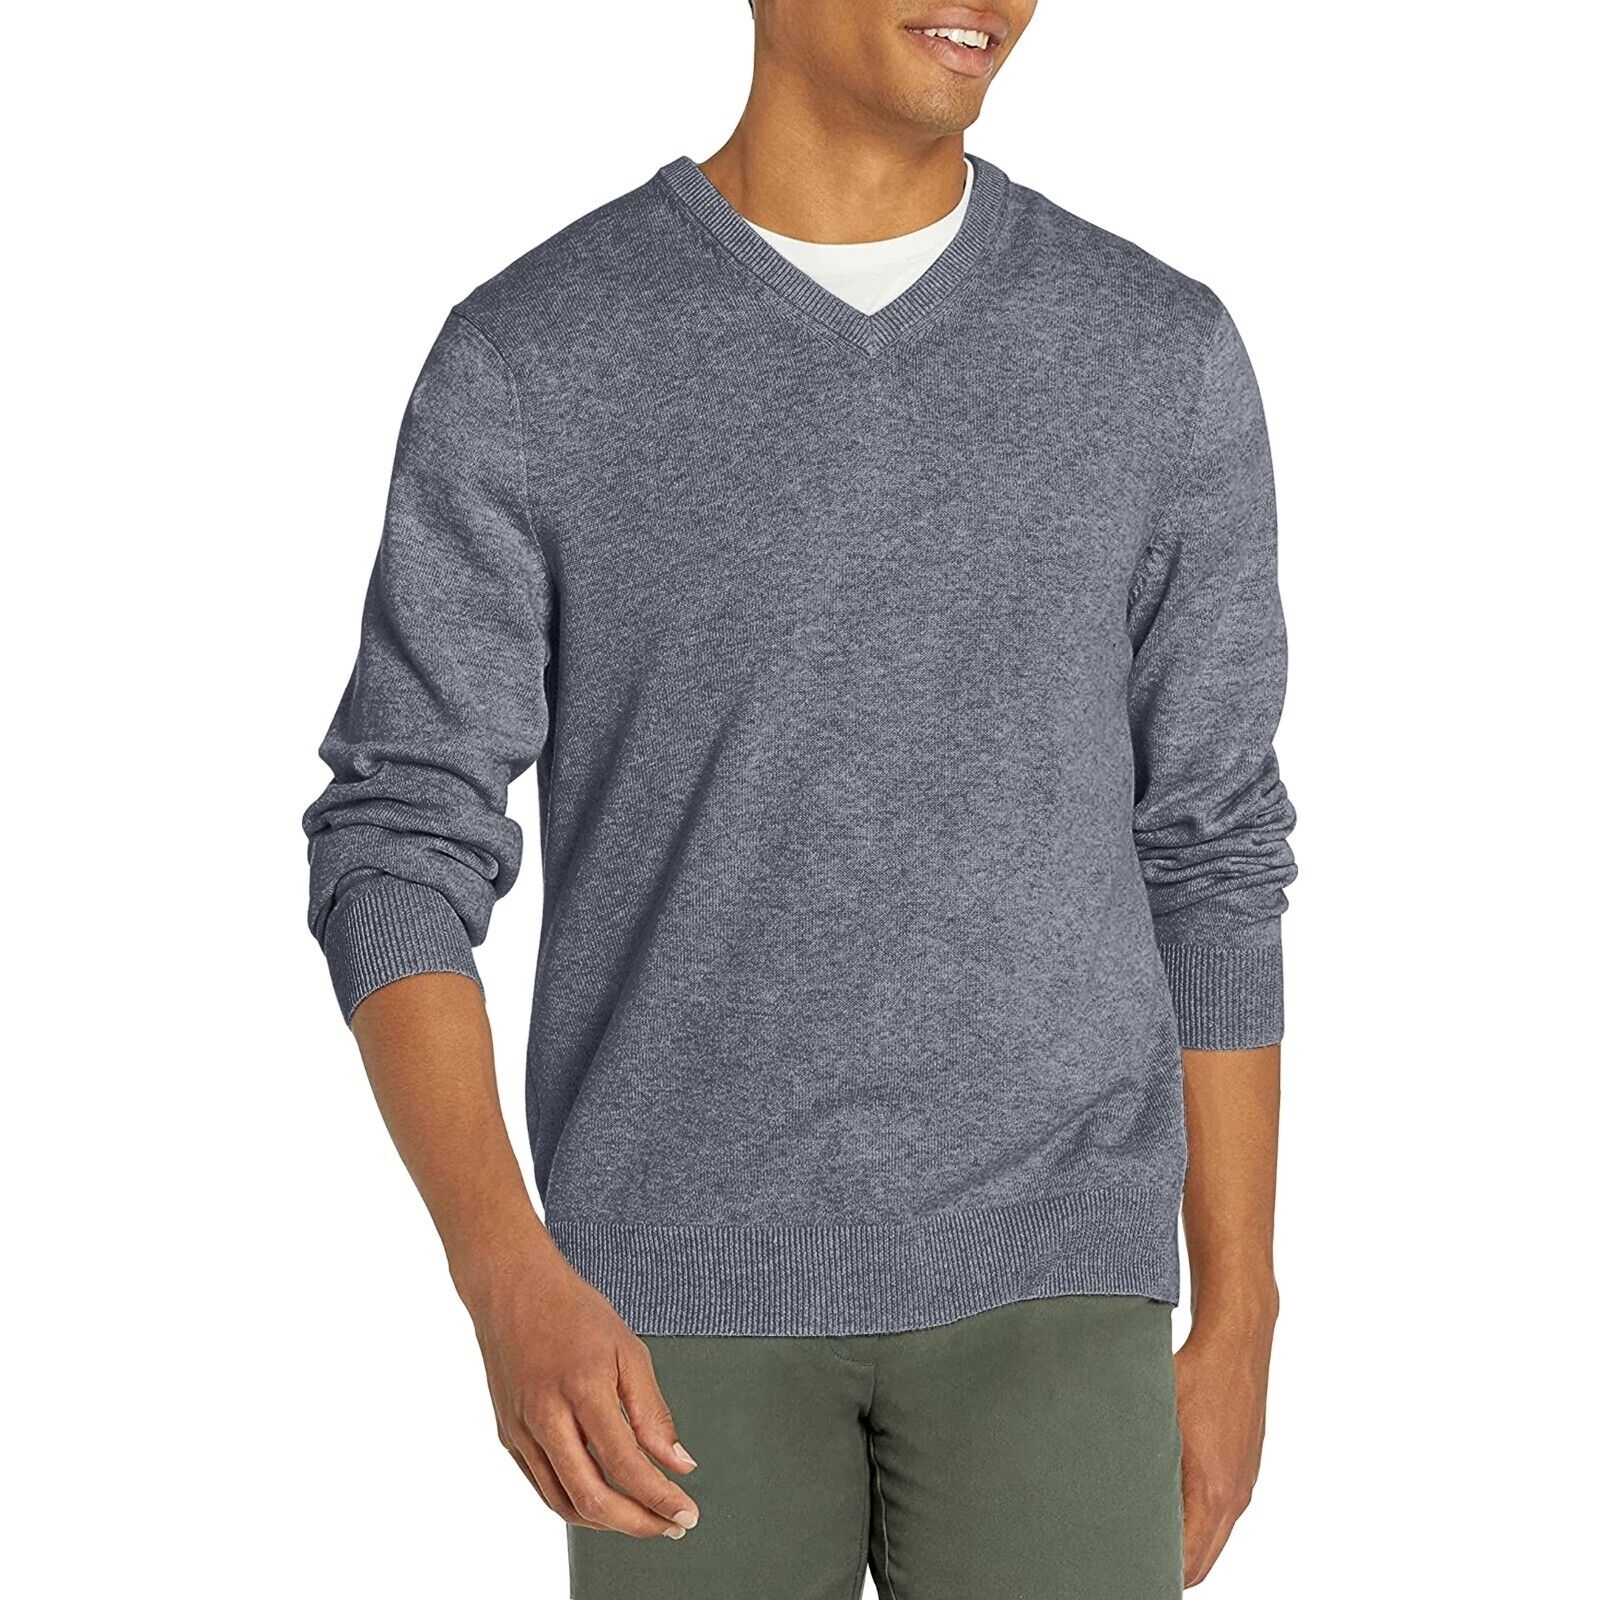 Men's Casual Ultra-Soft Slim Fit Warm Knit Pullover V-Neck Sweater For Winter - Blue, Large